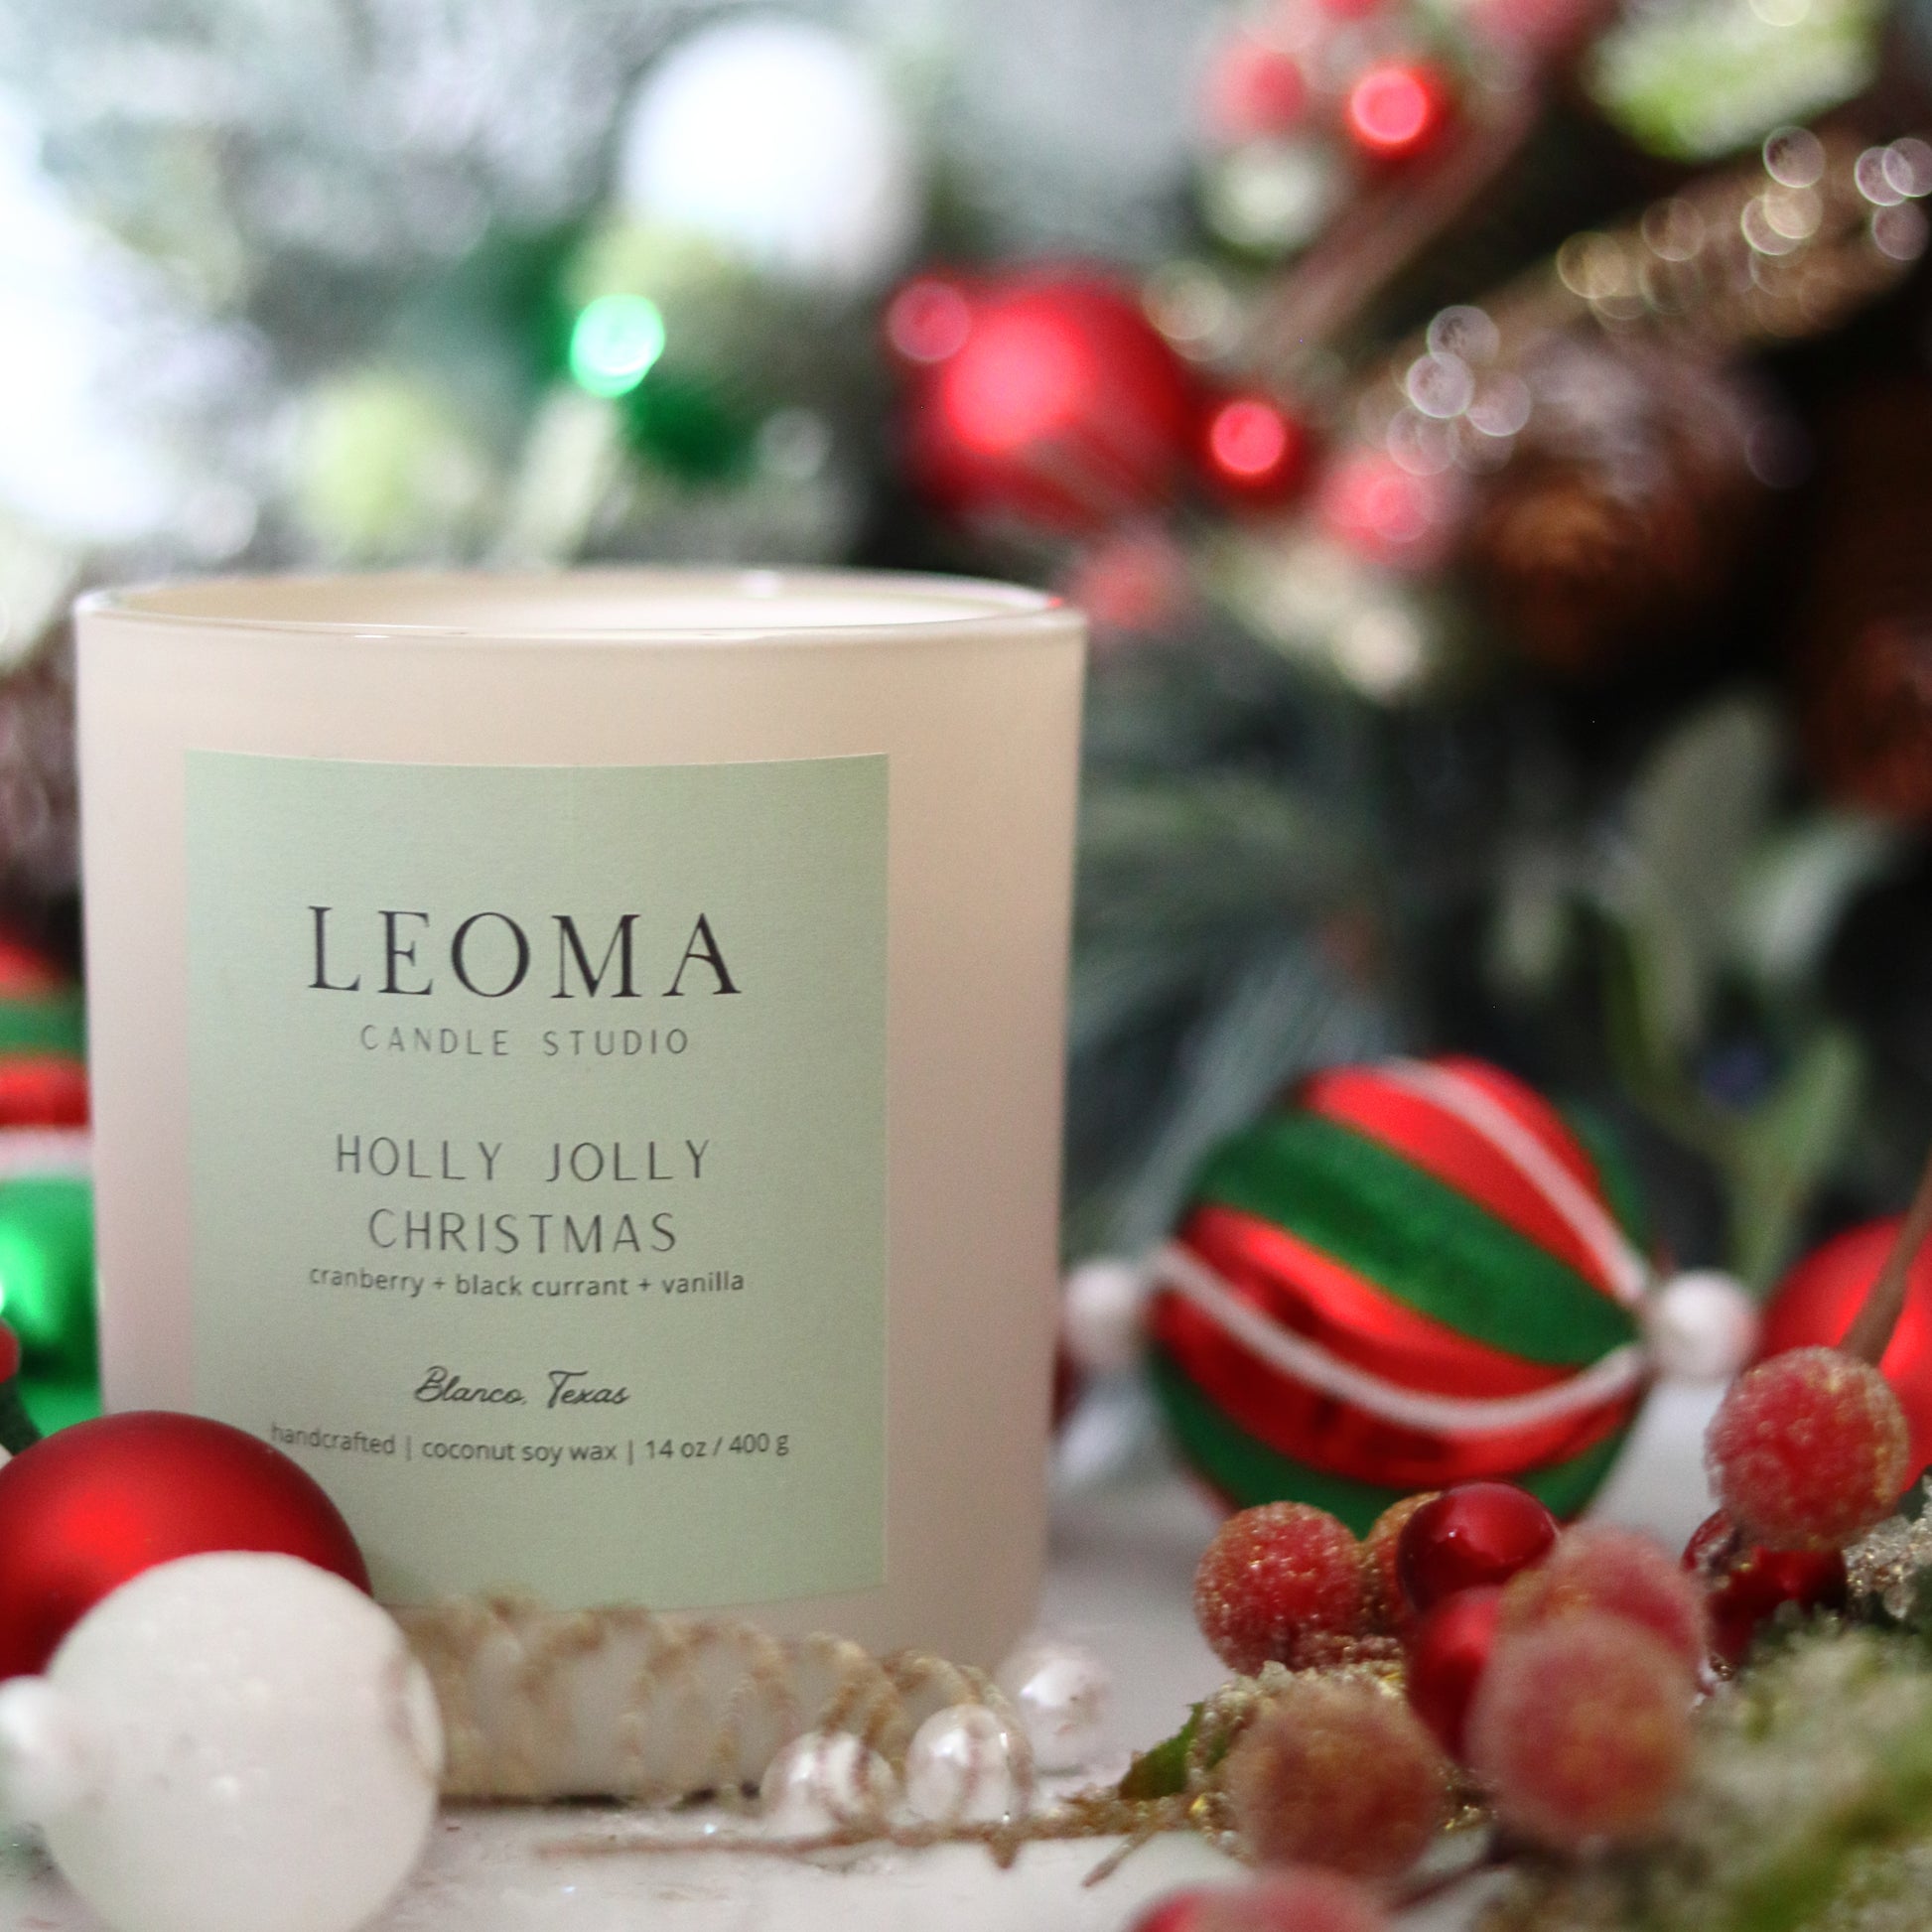 Handcrafted eco-friendly scented candle. Natural coconut & soy wax, toxin-free, 100% cotton wicks. Cream vessel. Holly Jolly Christmas scented.